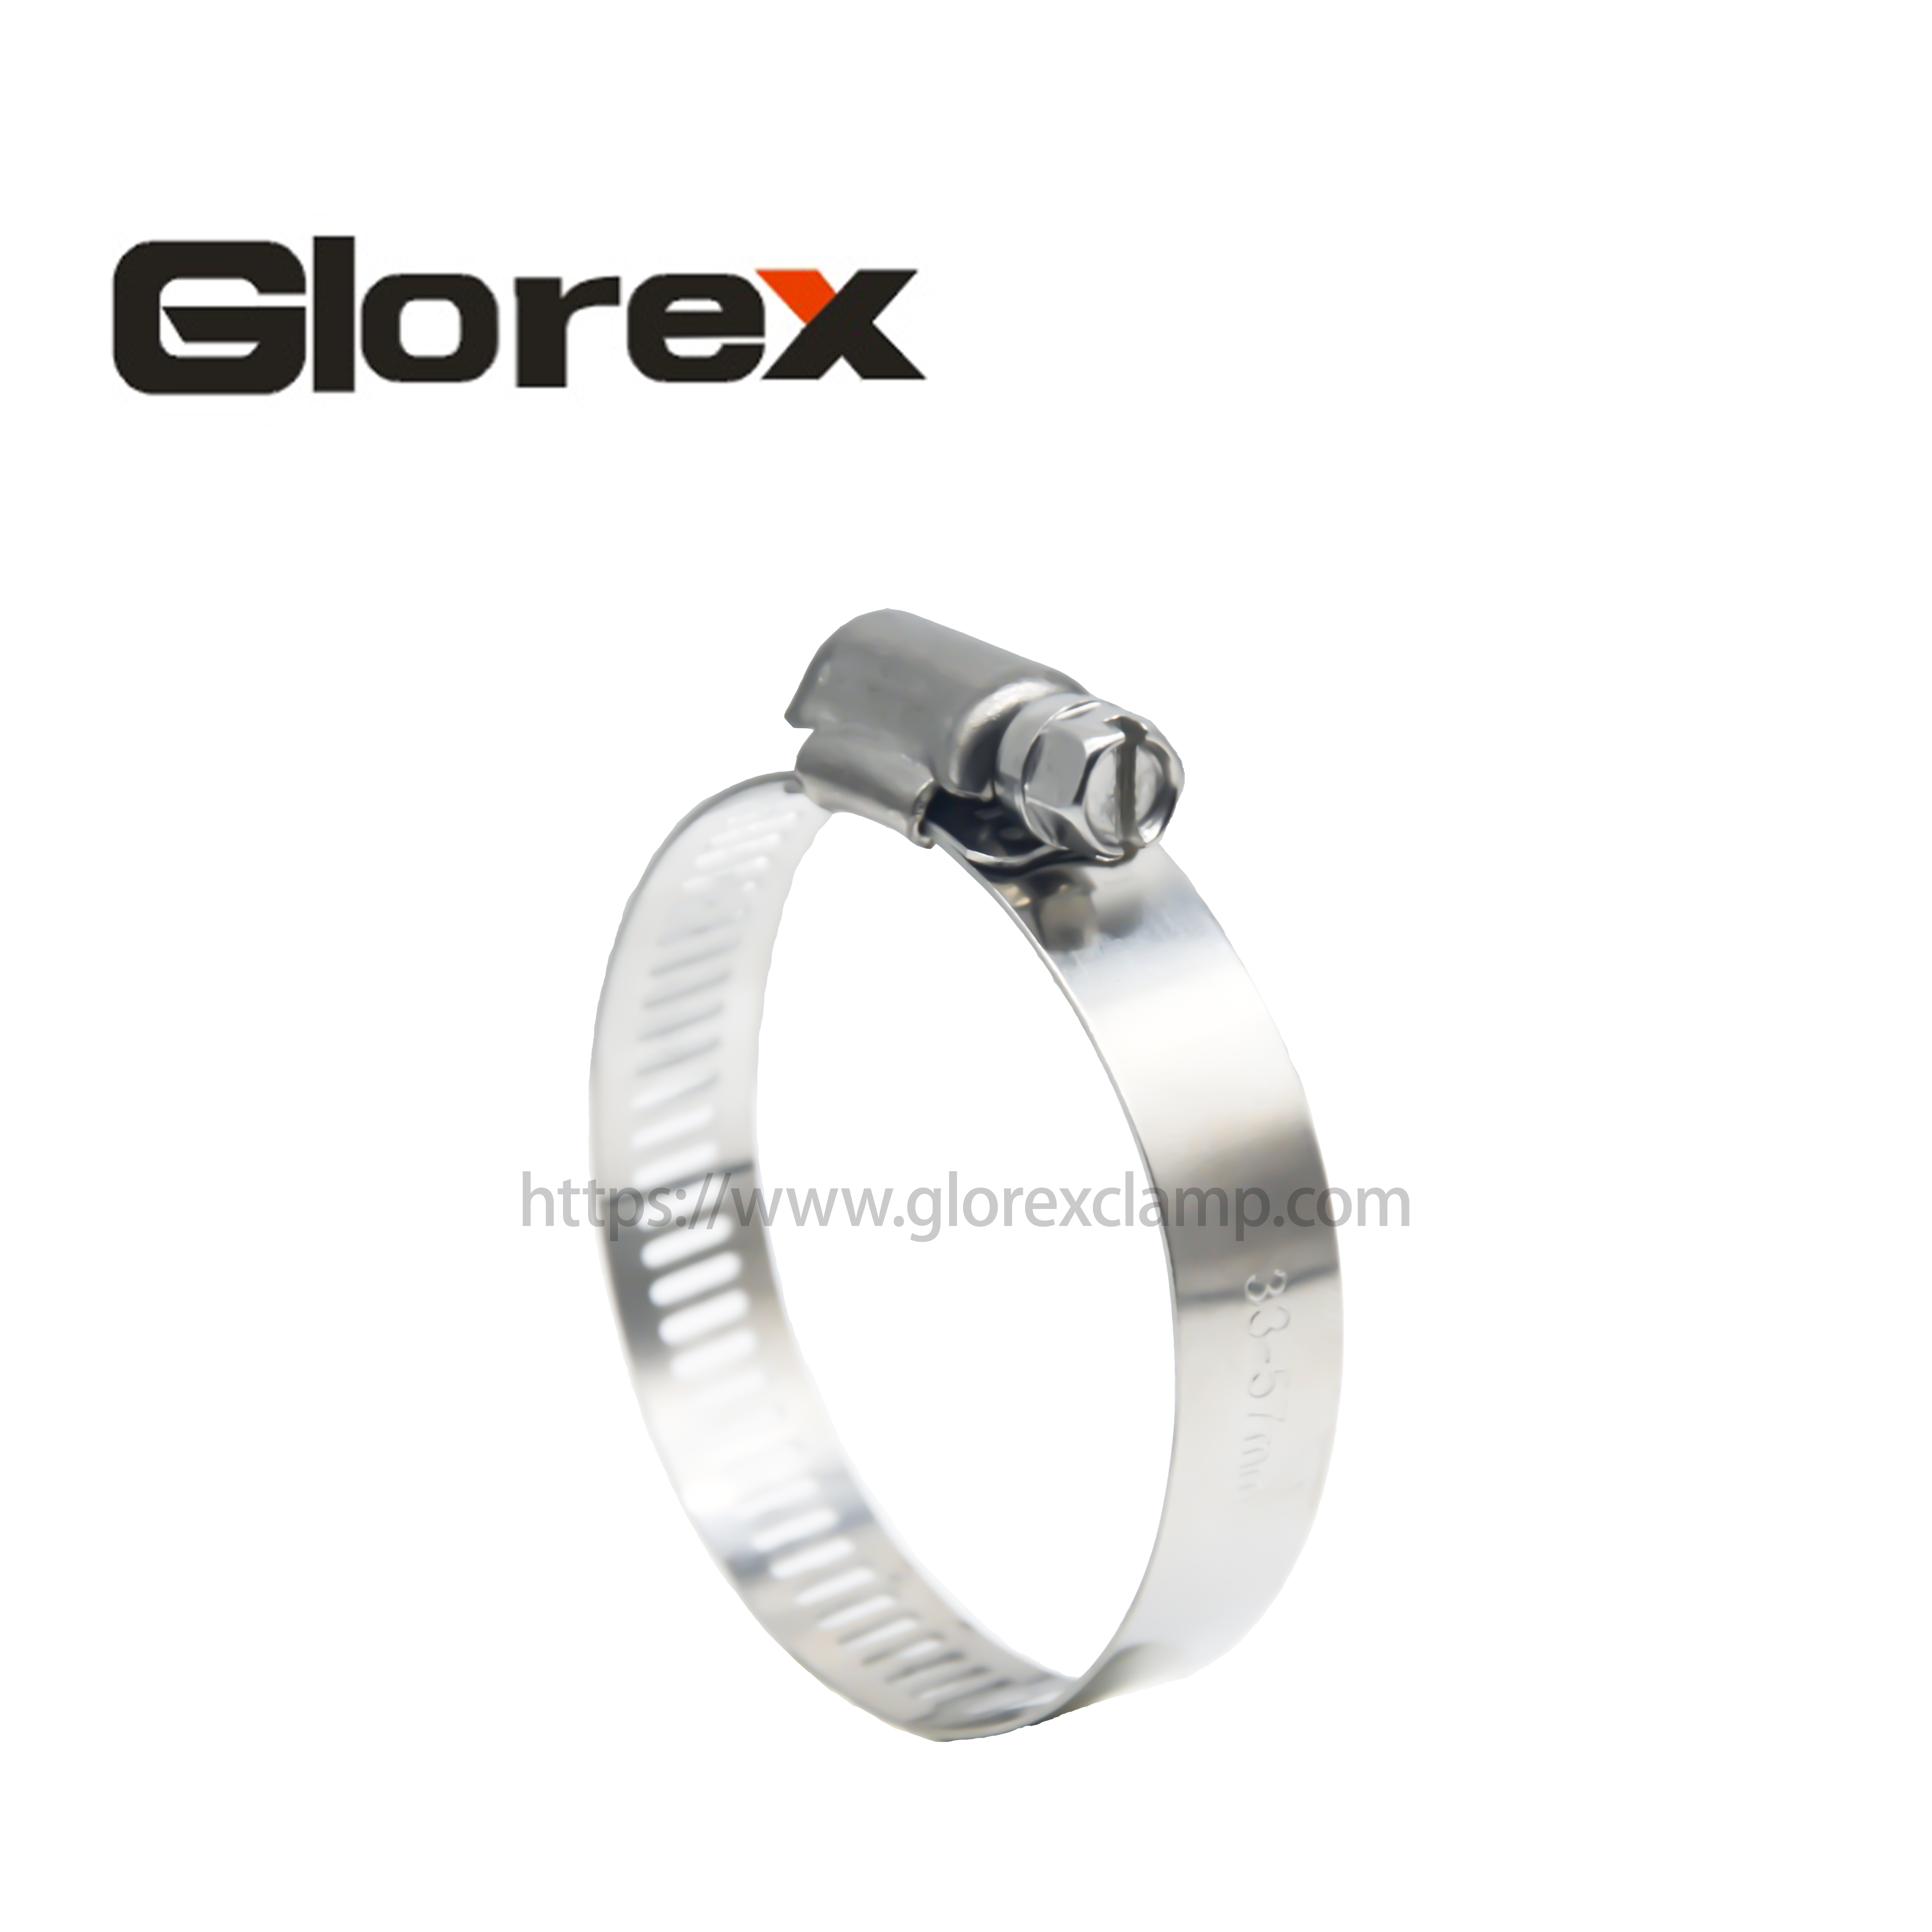 12.7mm American type hose clamp Featured Image